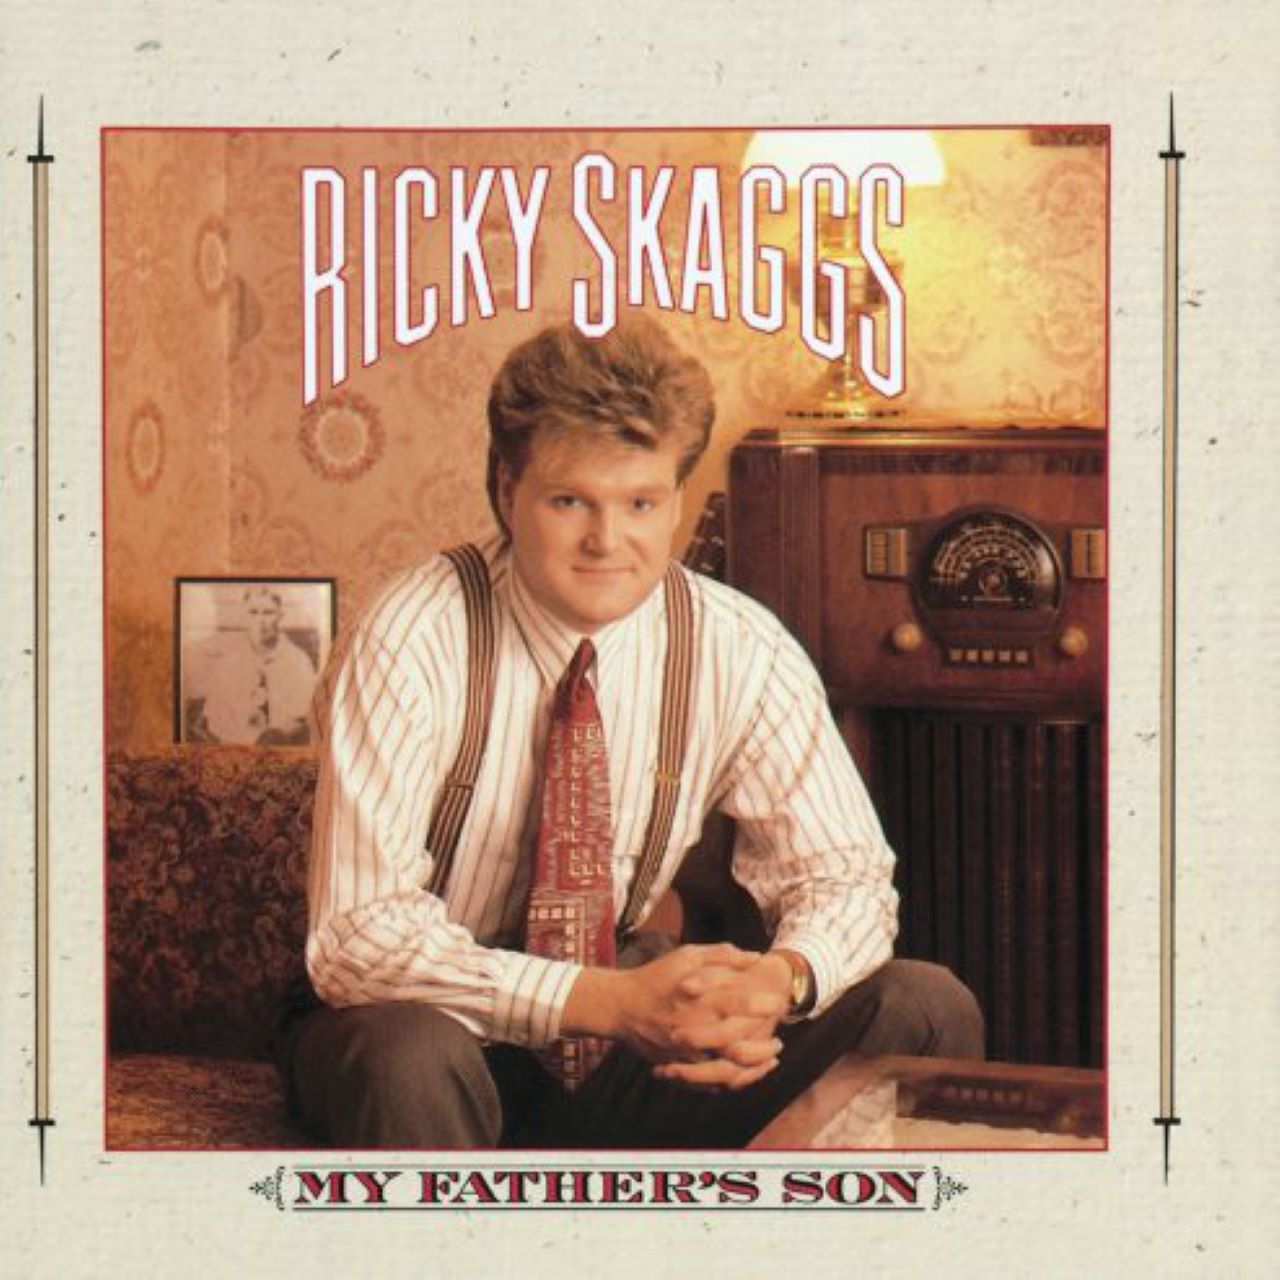 Ricky Skaggs - My Father’s Son cover album